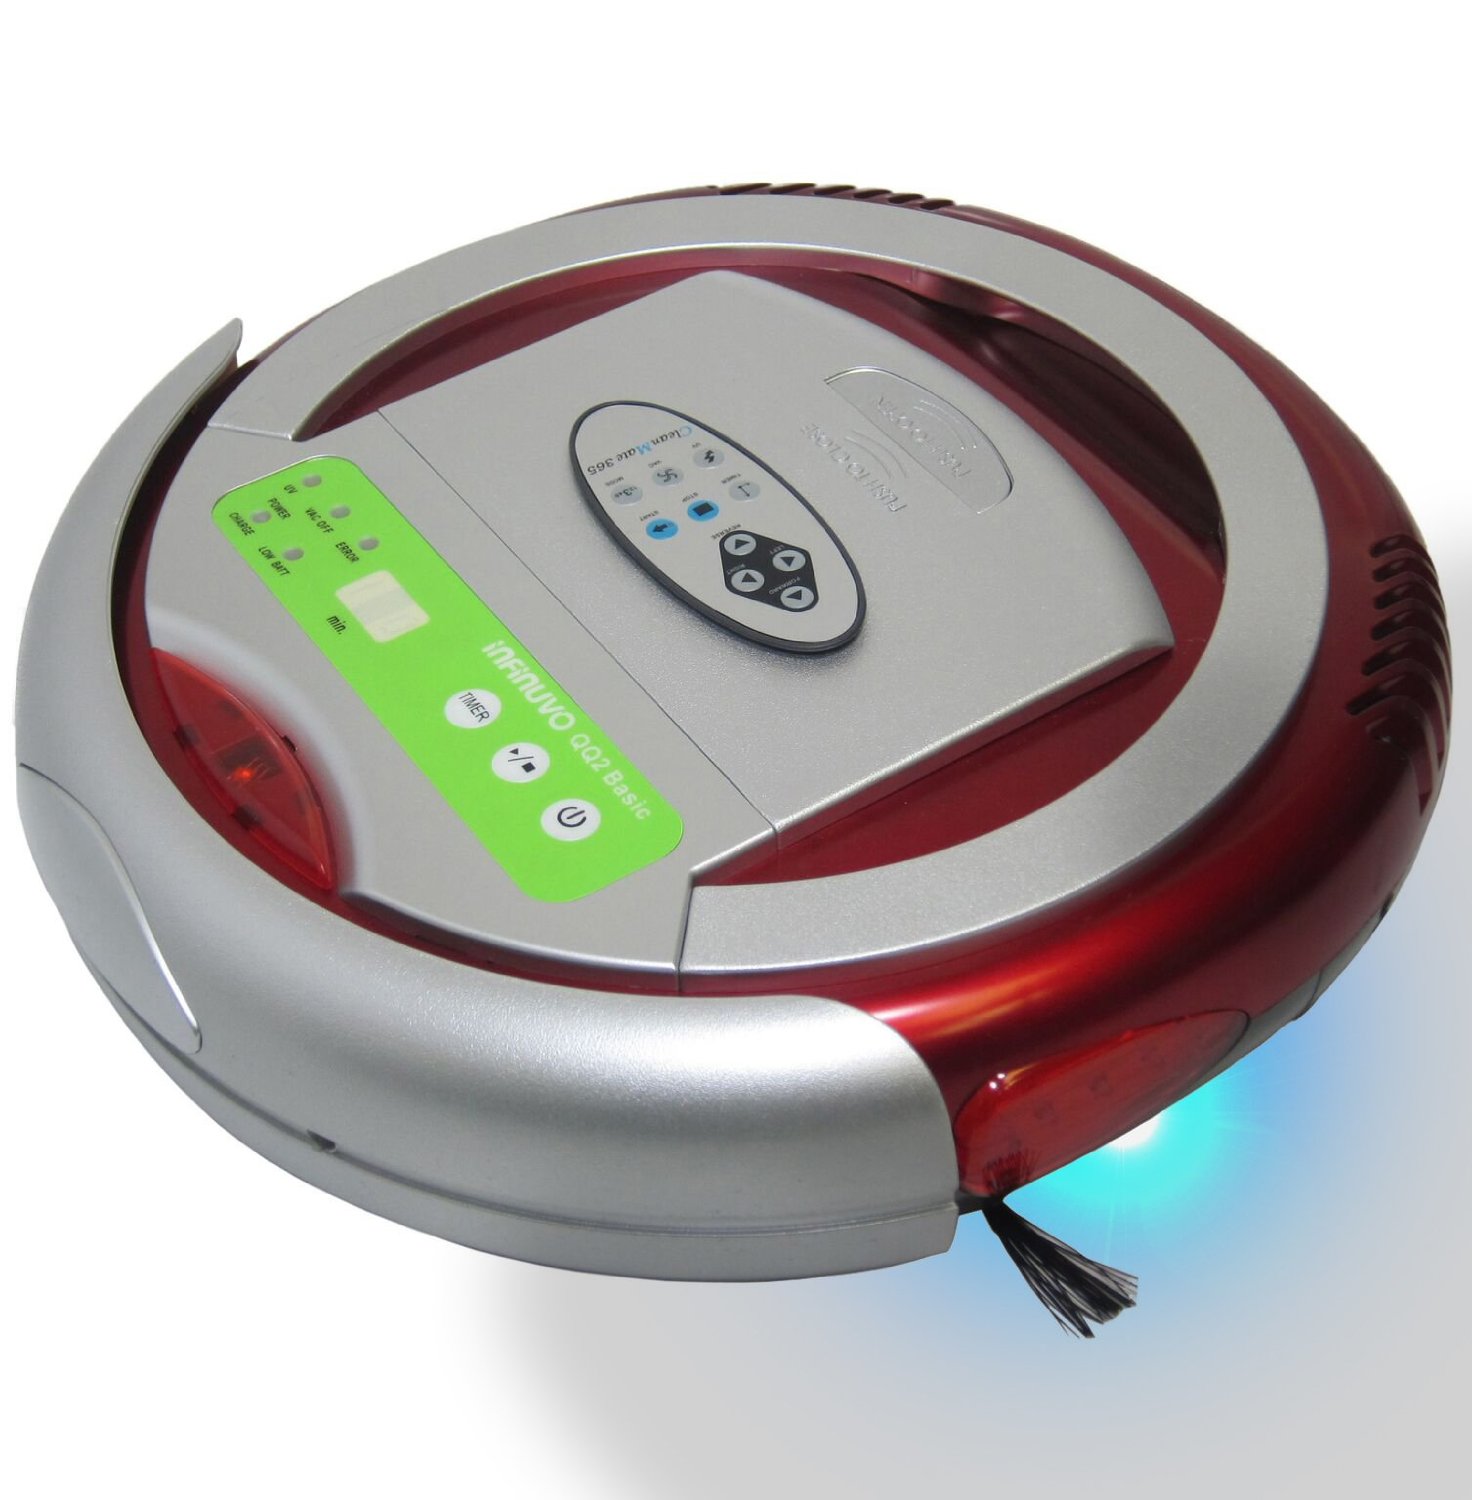 Infinuvo QQ2 Basic Robotic Vacuum Cleaner - Vacuum, Sweep and Sterilize 3-in-1 Automatic Robo